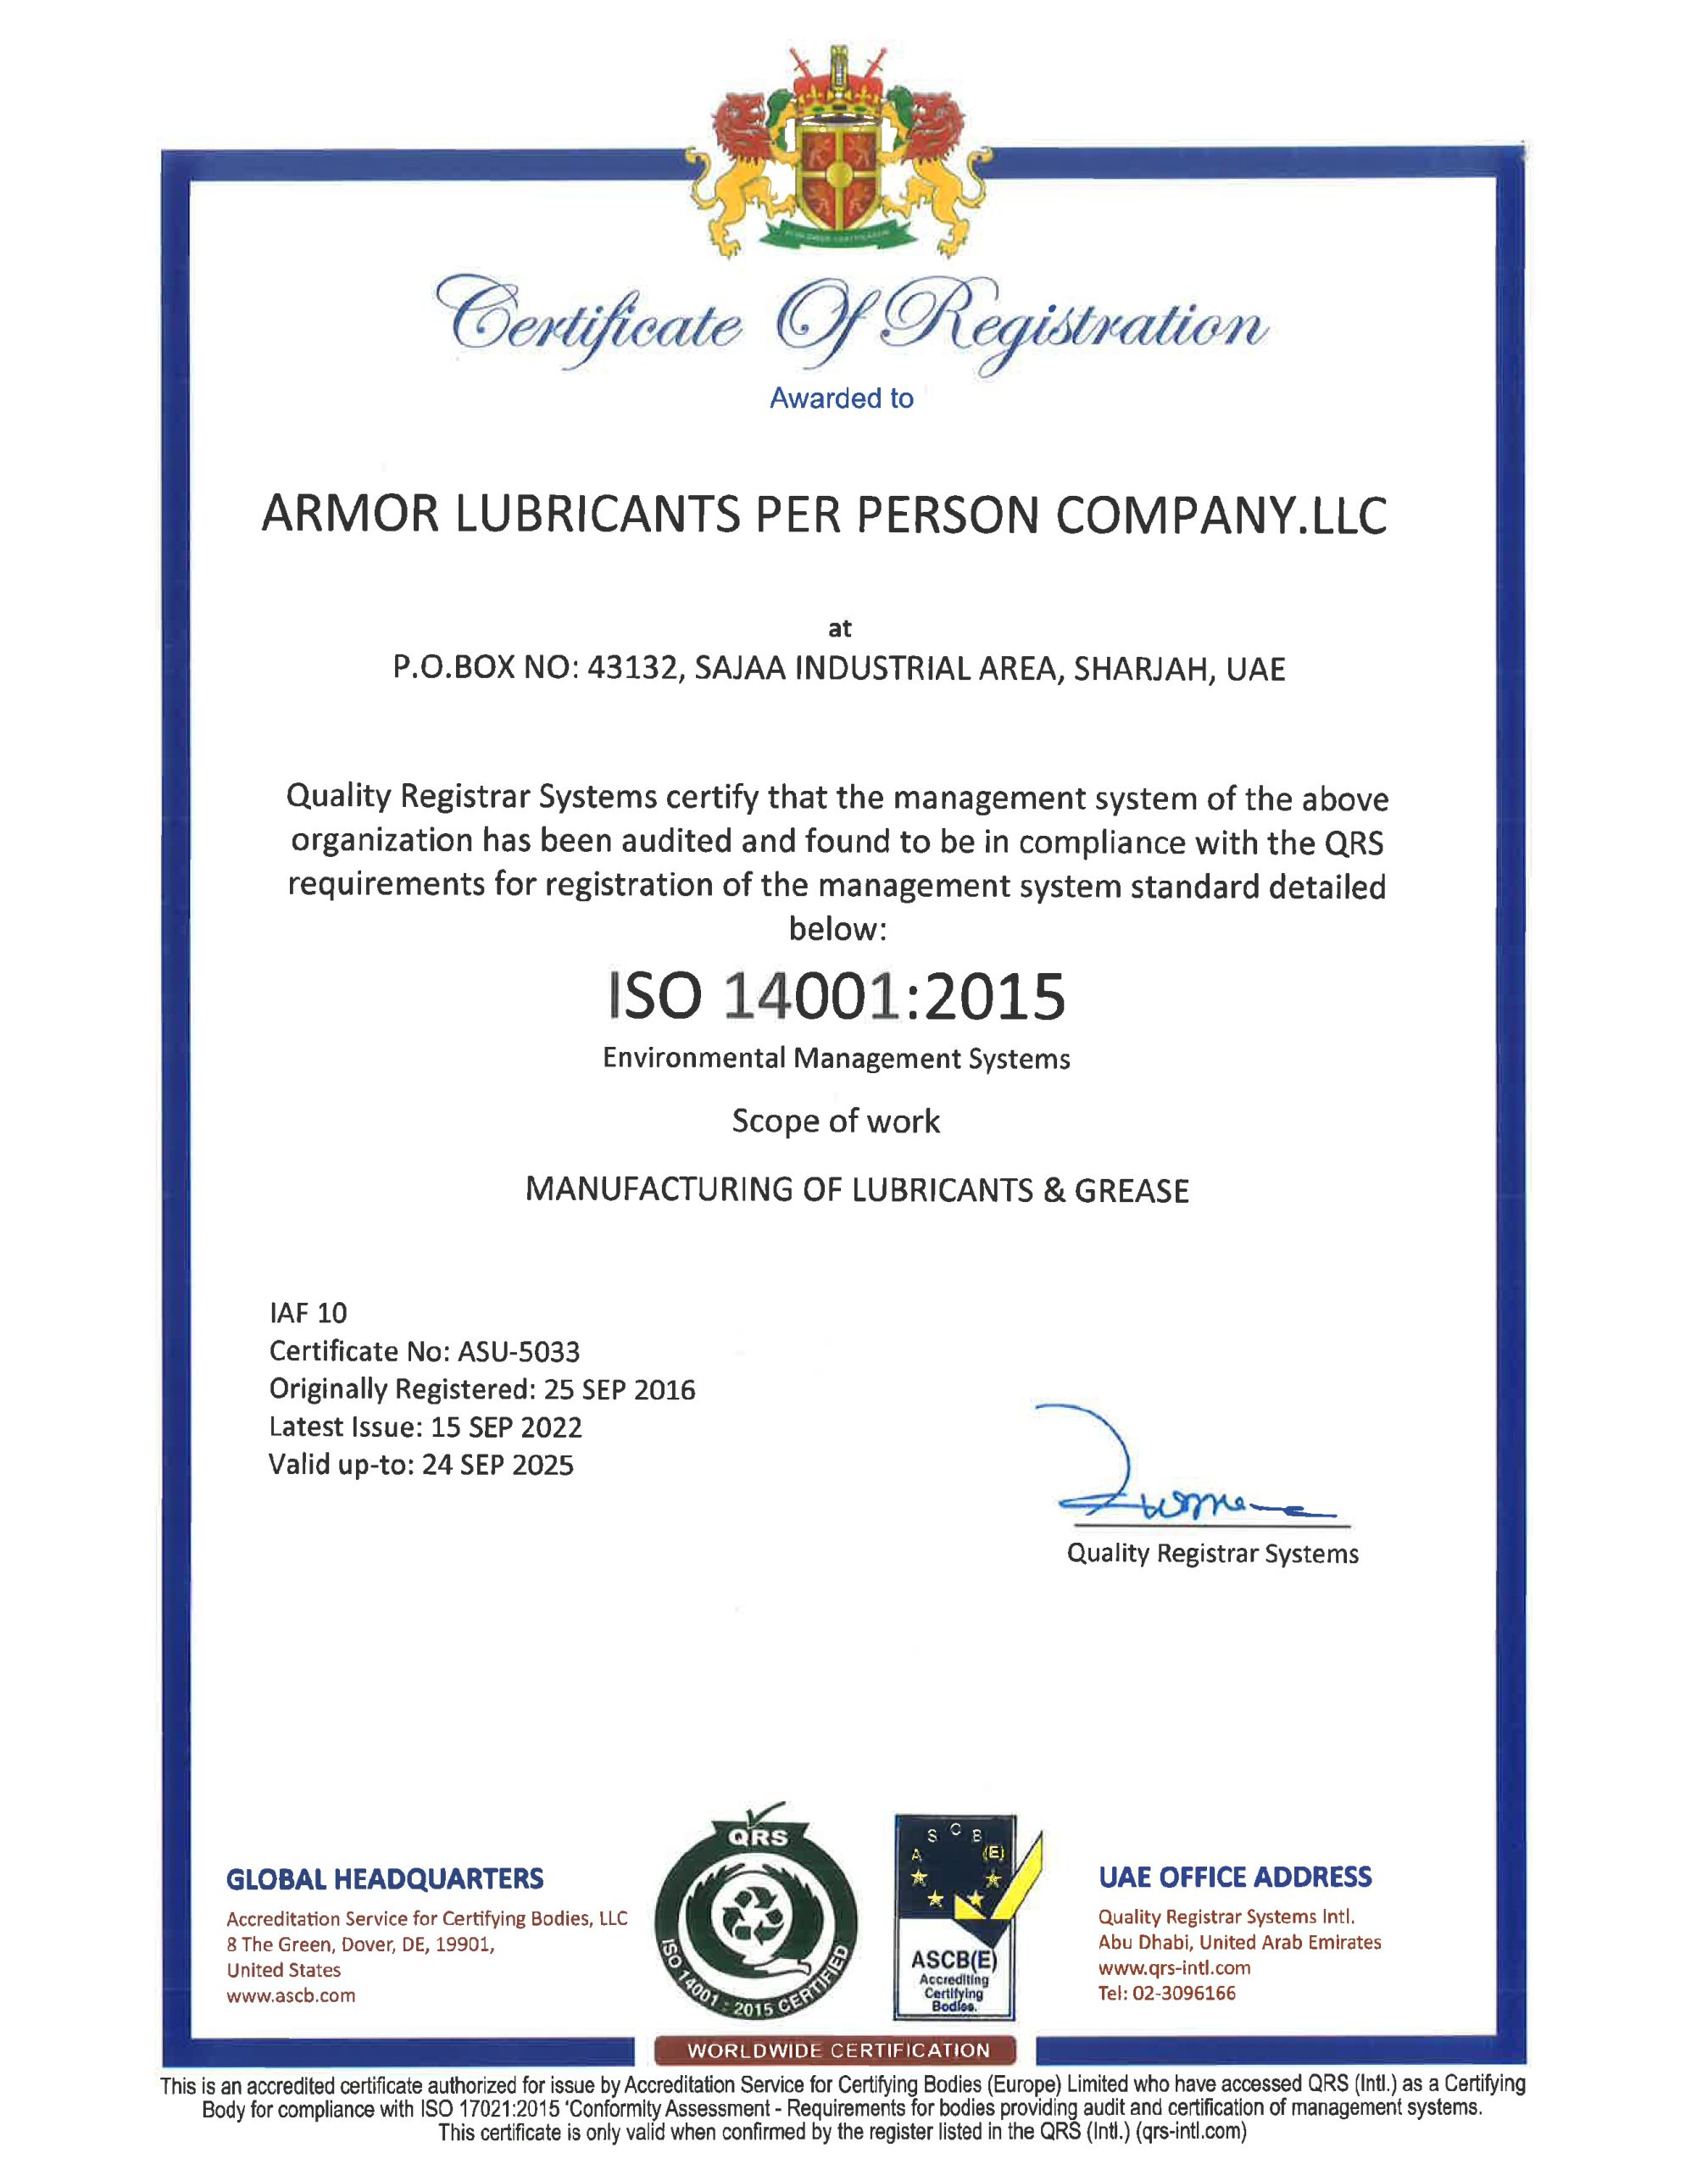 Armor ISO 14001 Environmental Management Systems (EMS) Certification